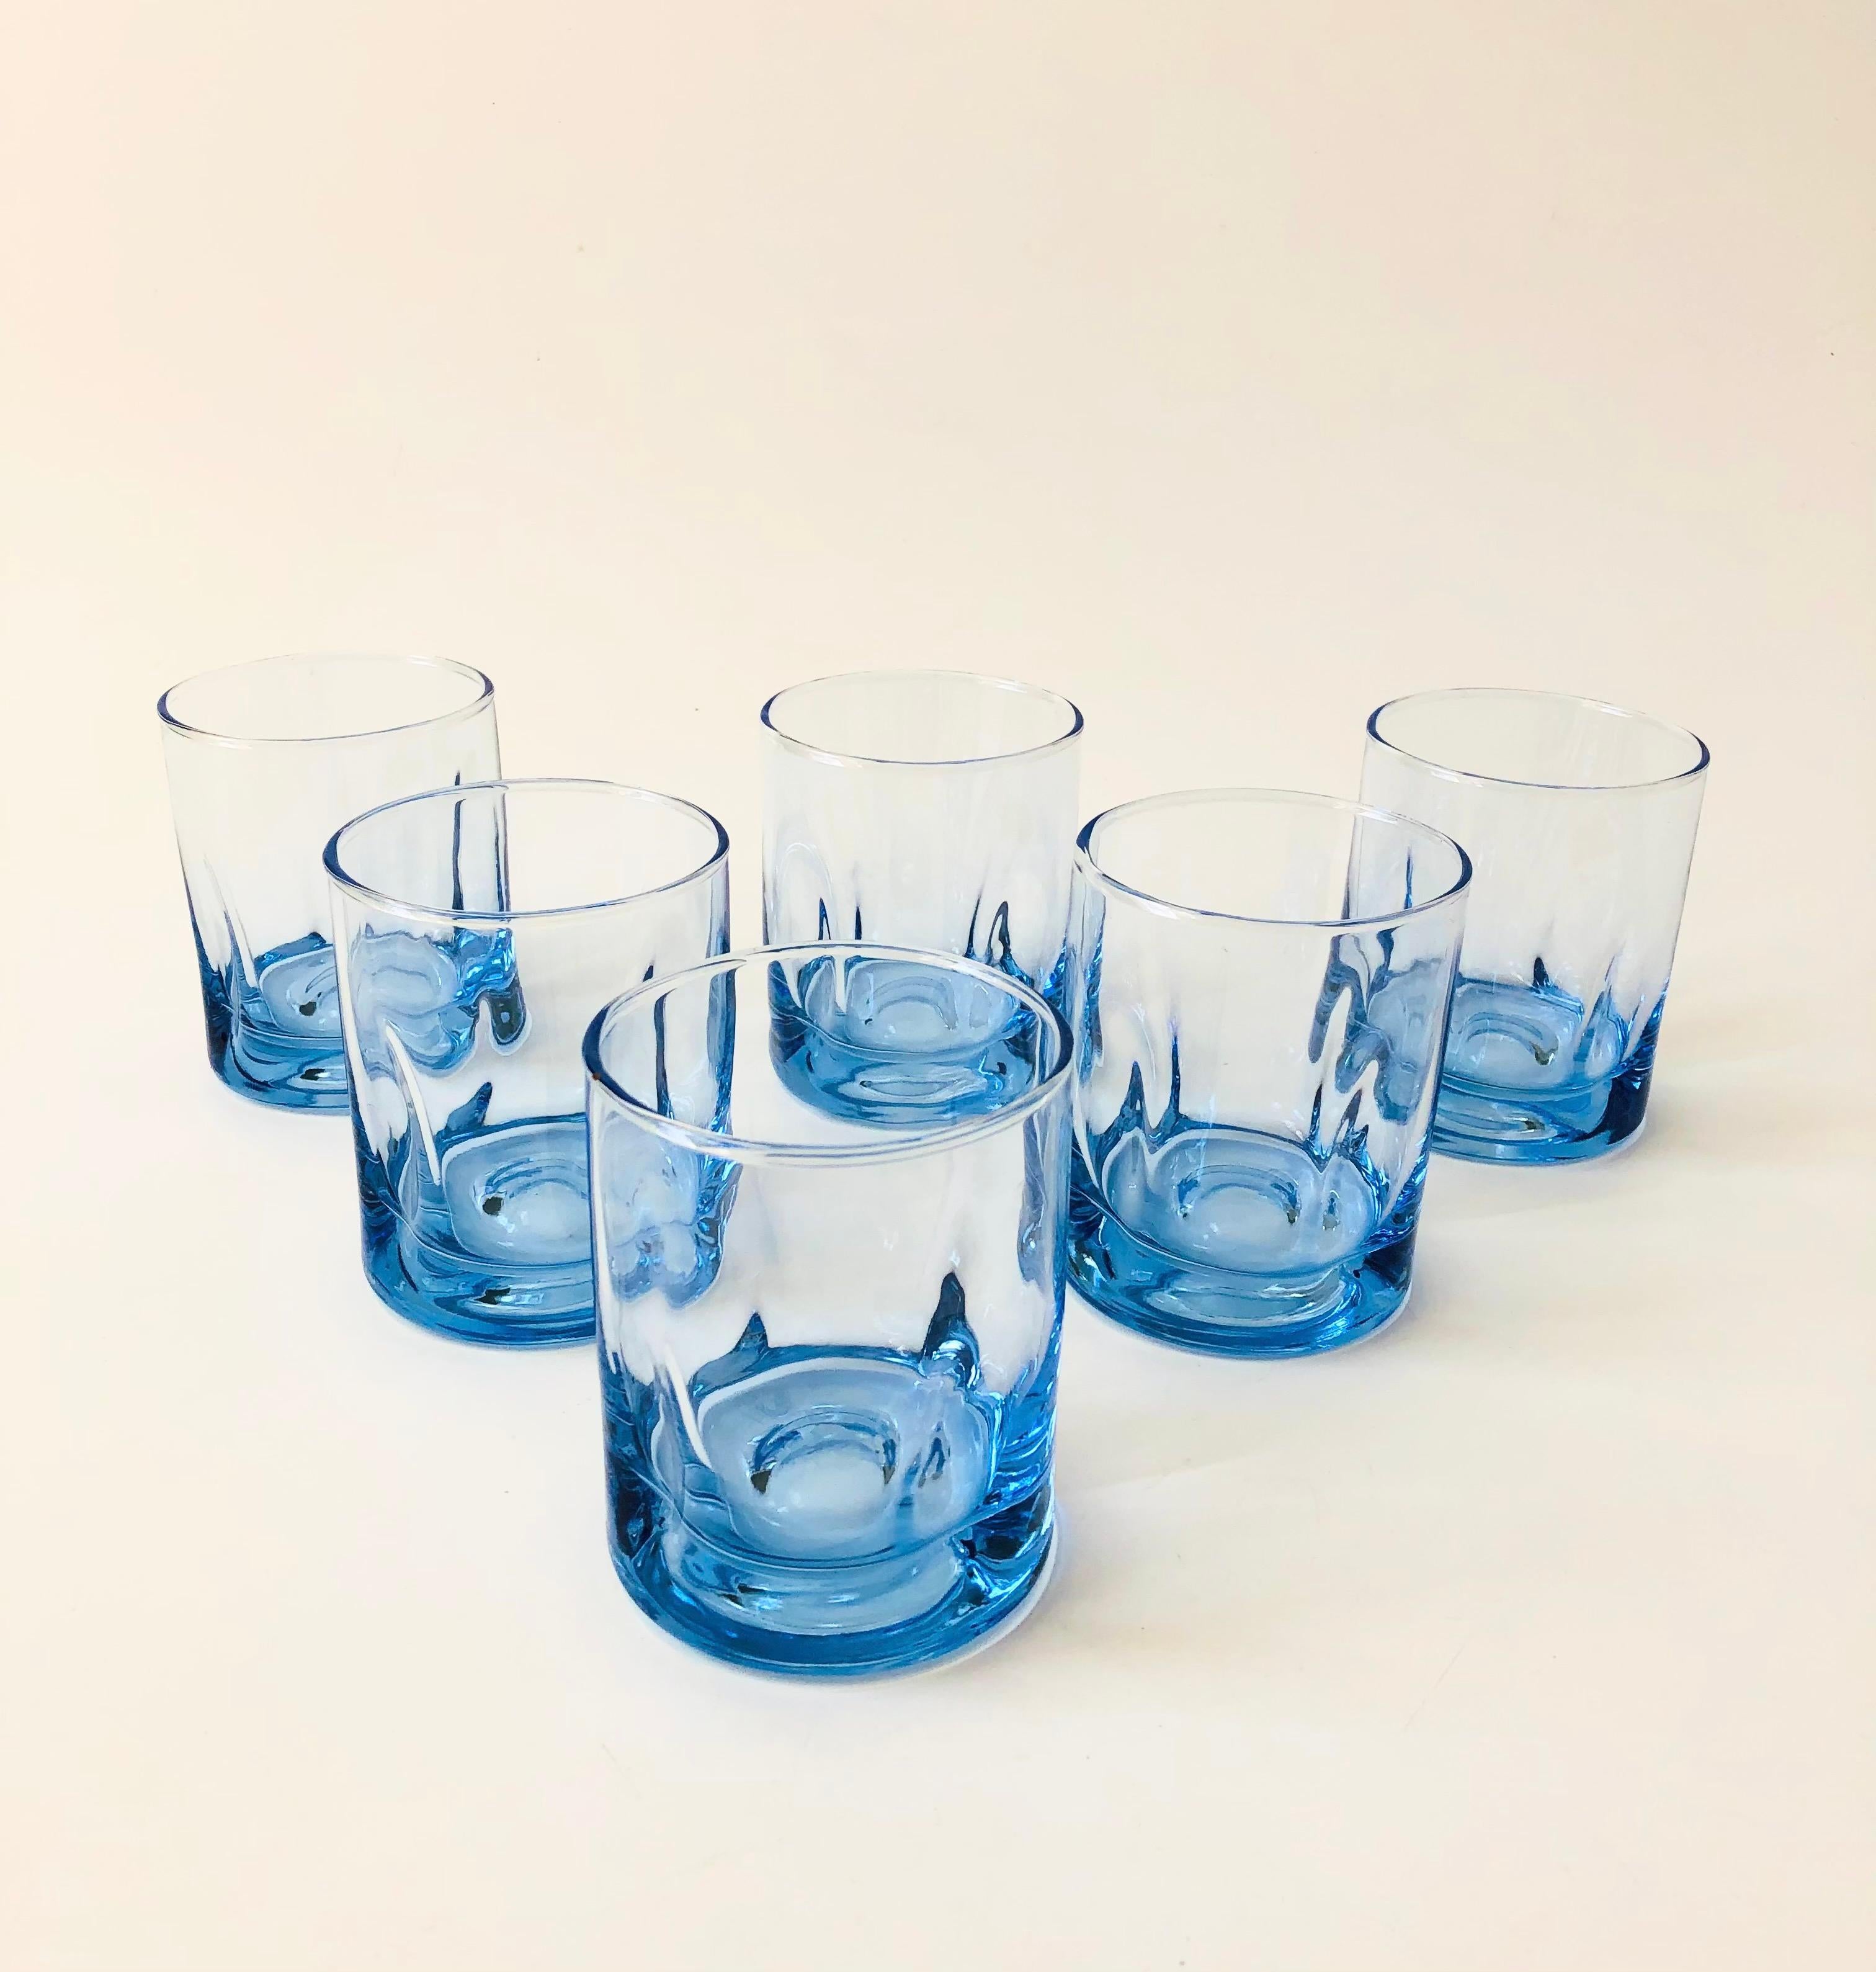 A set of 6 beautiful vintage cocktail glasses in a pale blue-periwinkel color. Each made out of thick glass with a great amorphous shape to the base.

